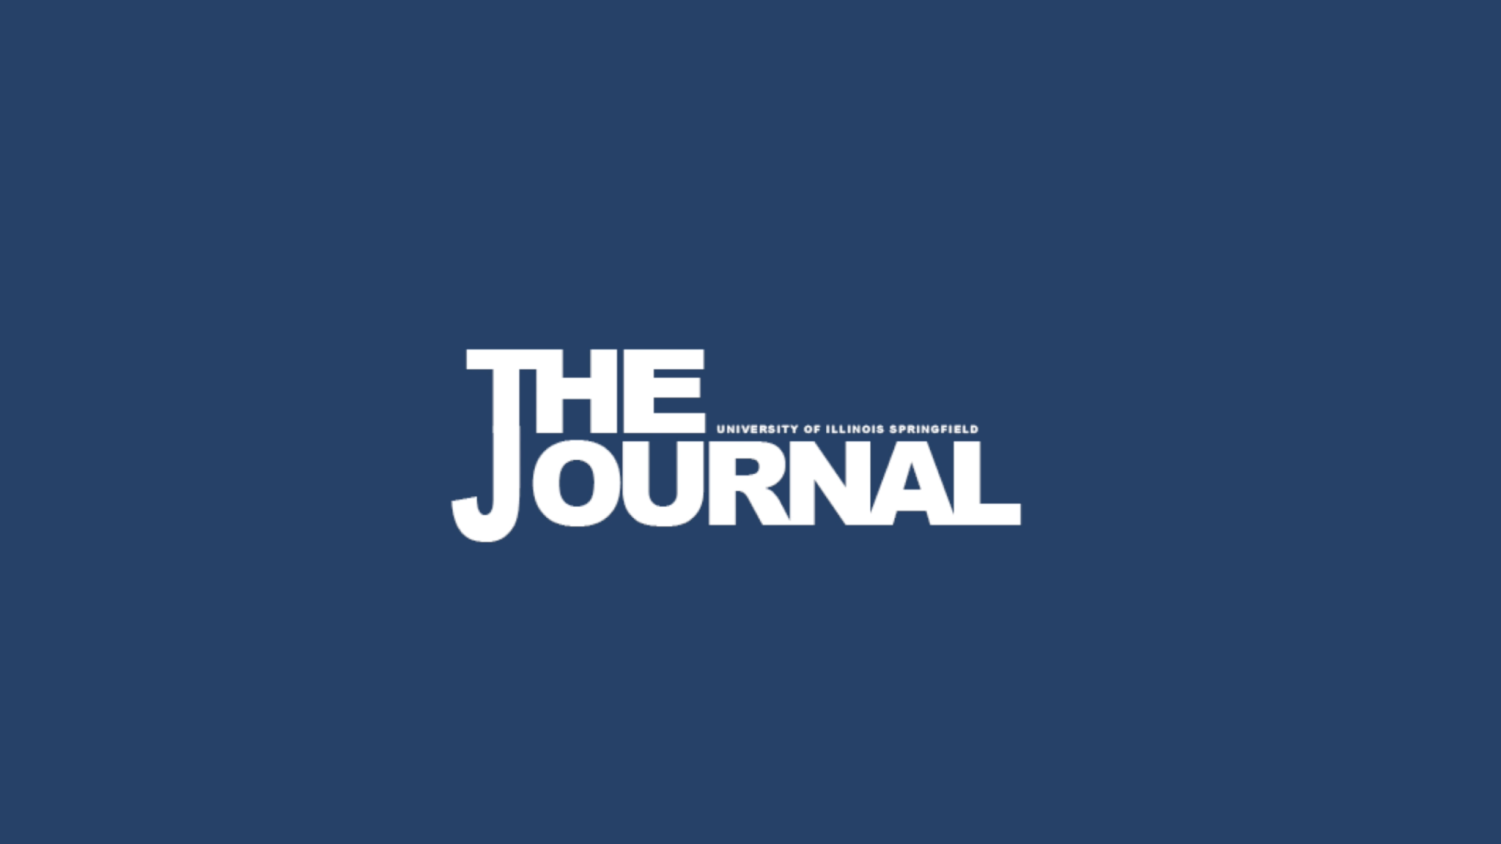 BEYOND | The Journal and COVID-19: Moving Forward – The Observer